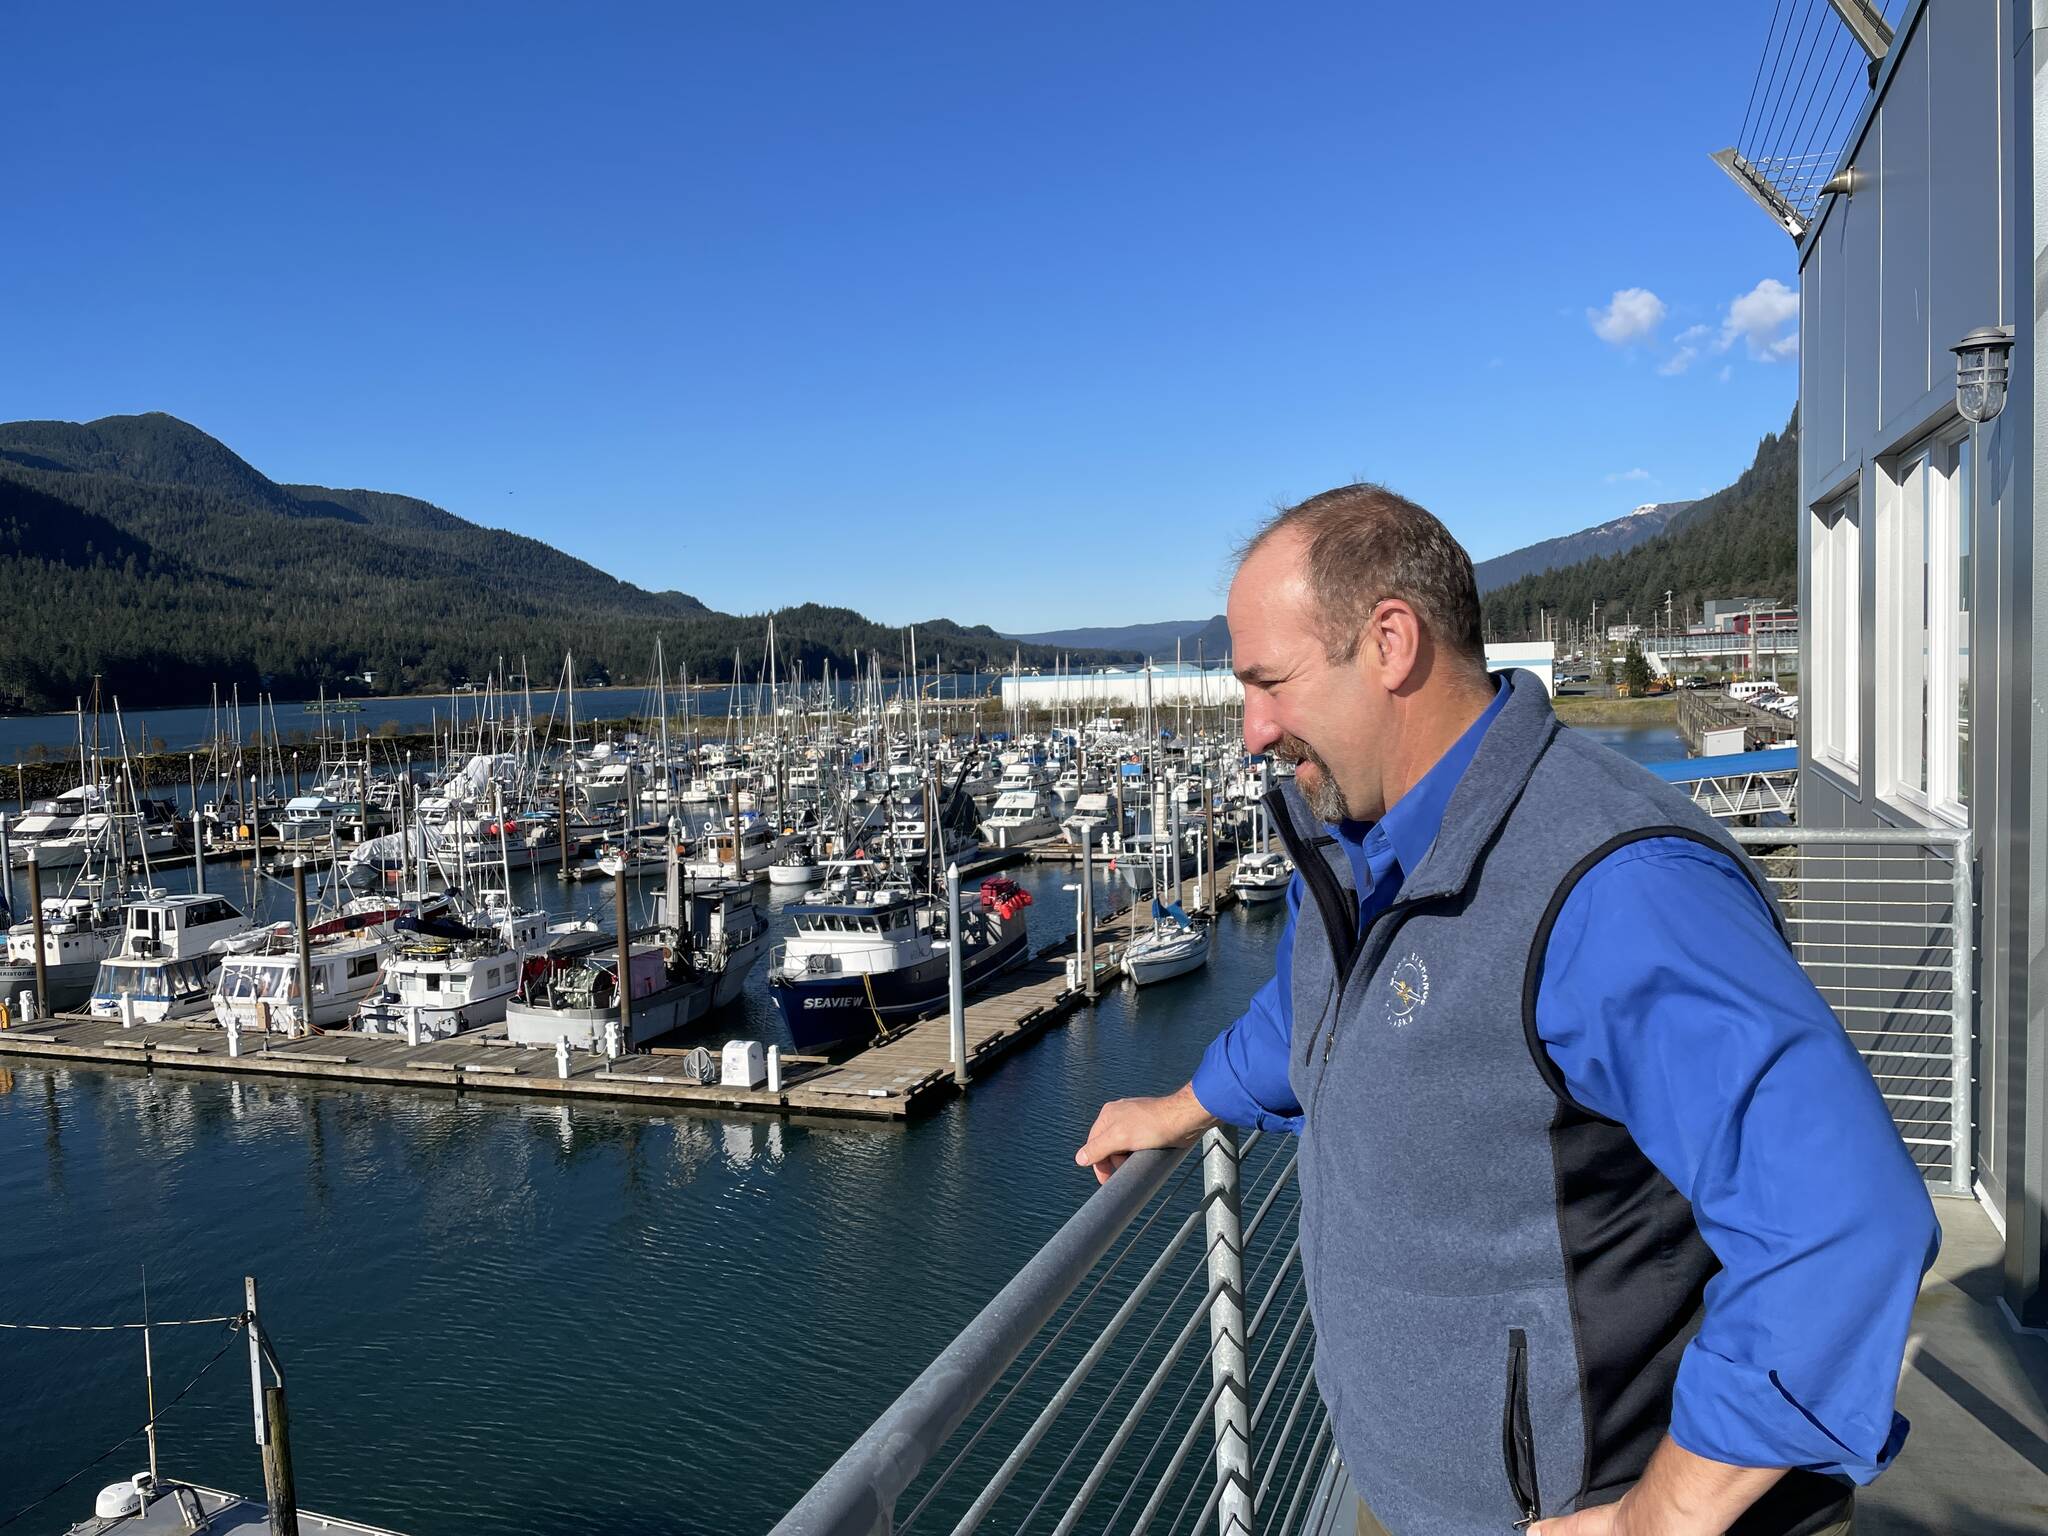 Stephen White took over the executive directorship of the Marine Exchange of Alaska in September following his retirement from the Coast Guard in July. (Michael S. Lockett/ Juneau Empire)